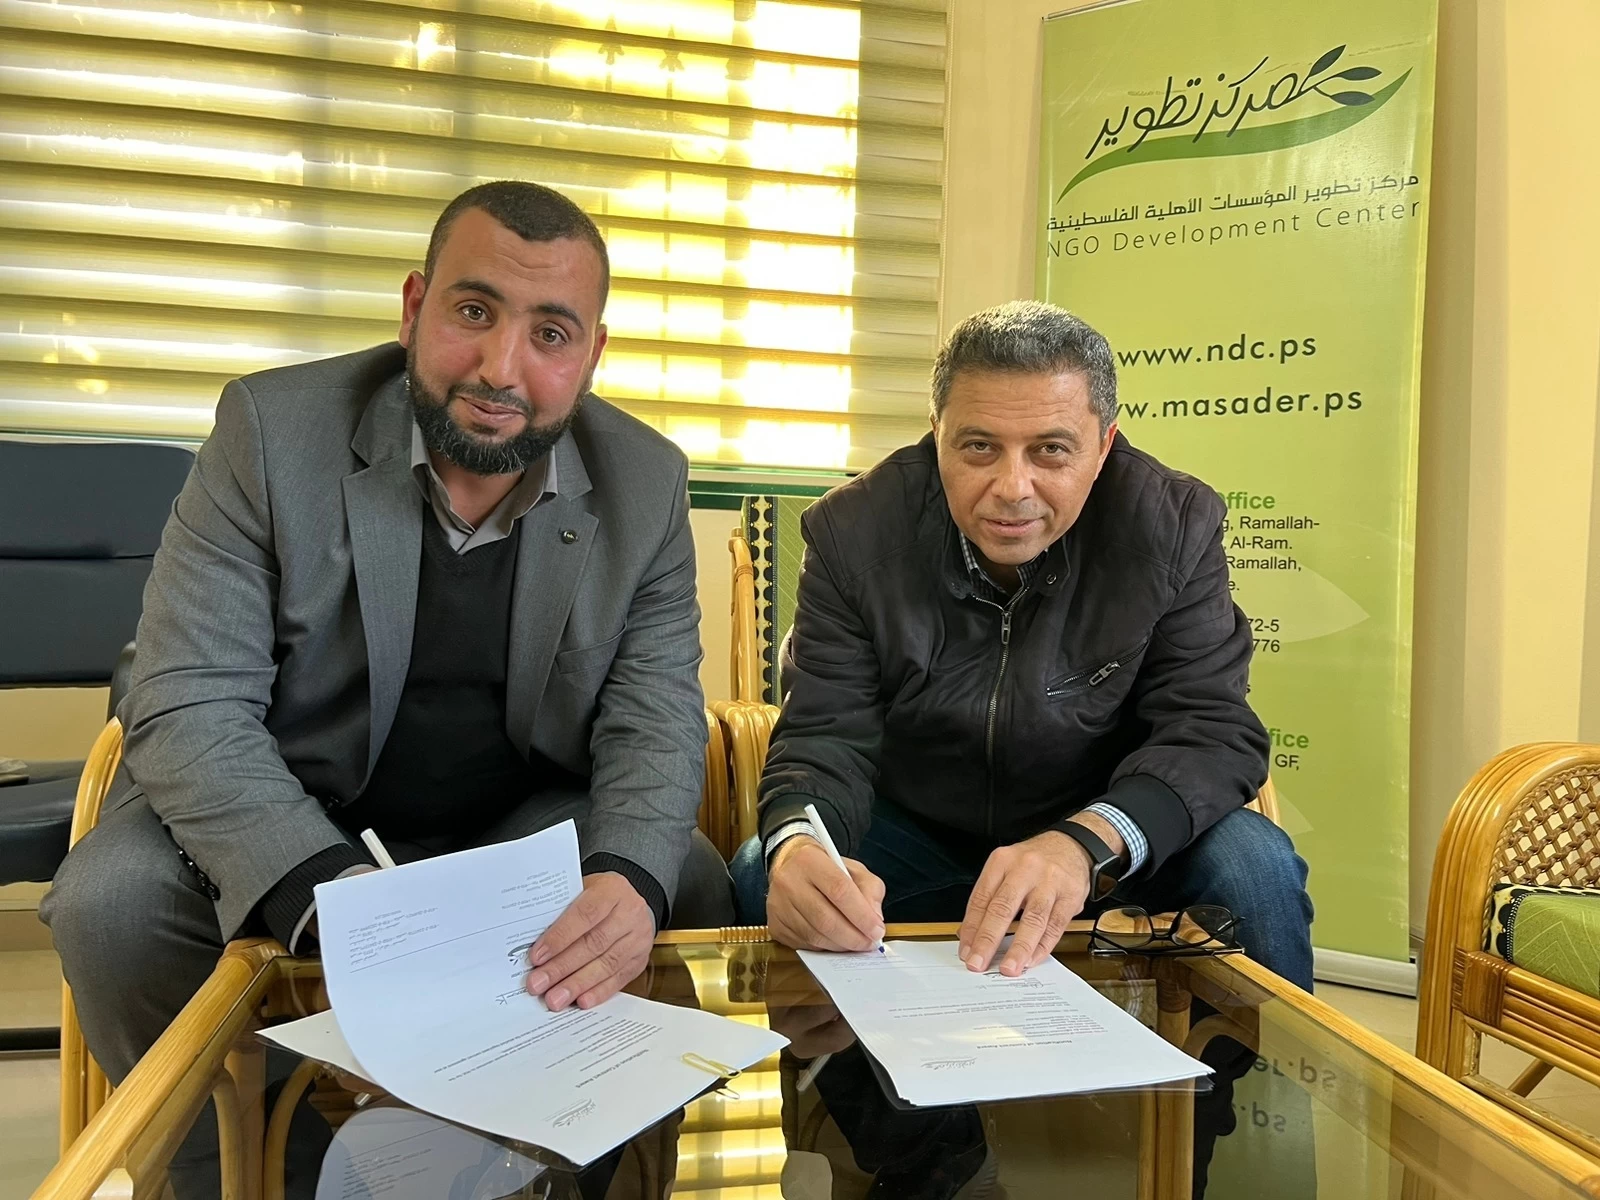 Signing a contract to develop a website for the Emergency Social Assistance Project in Gaza sector.